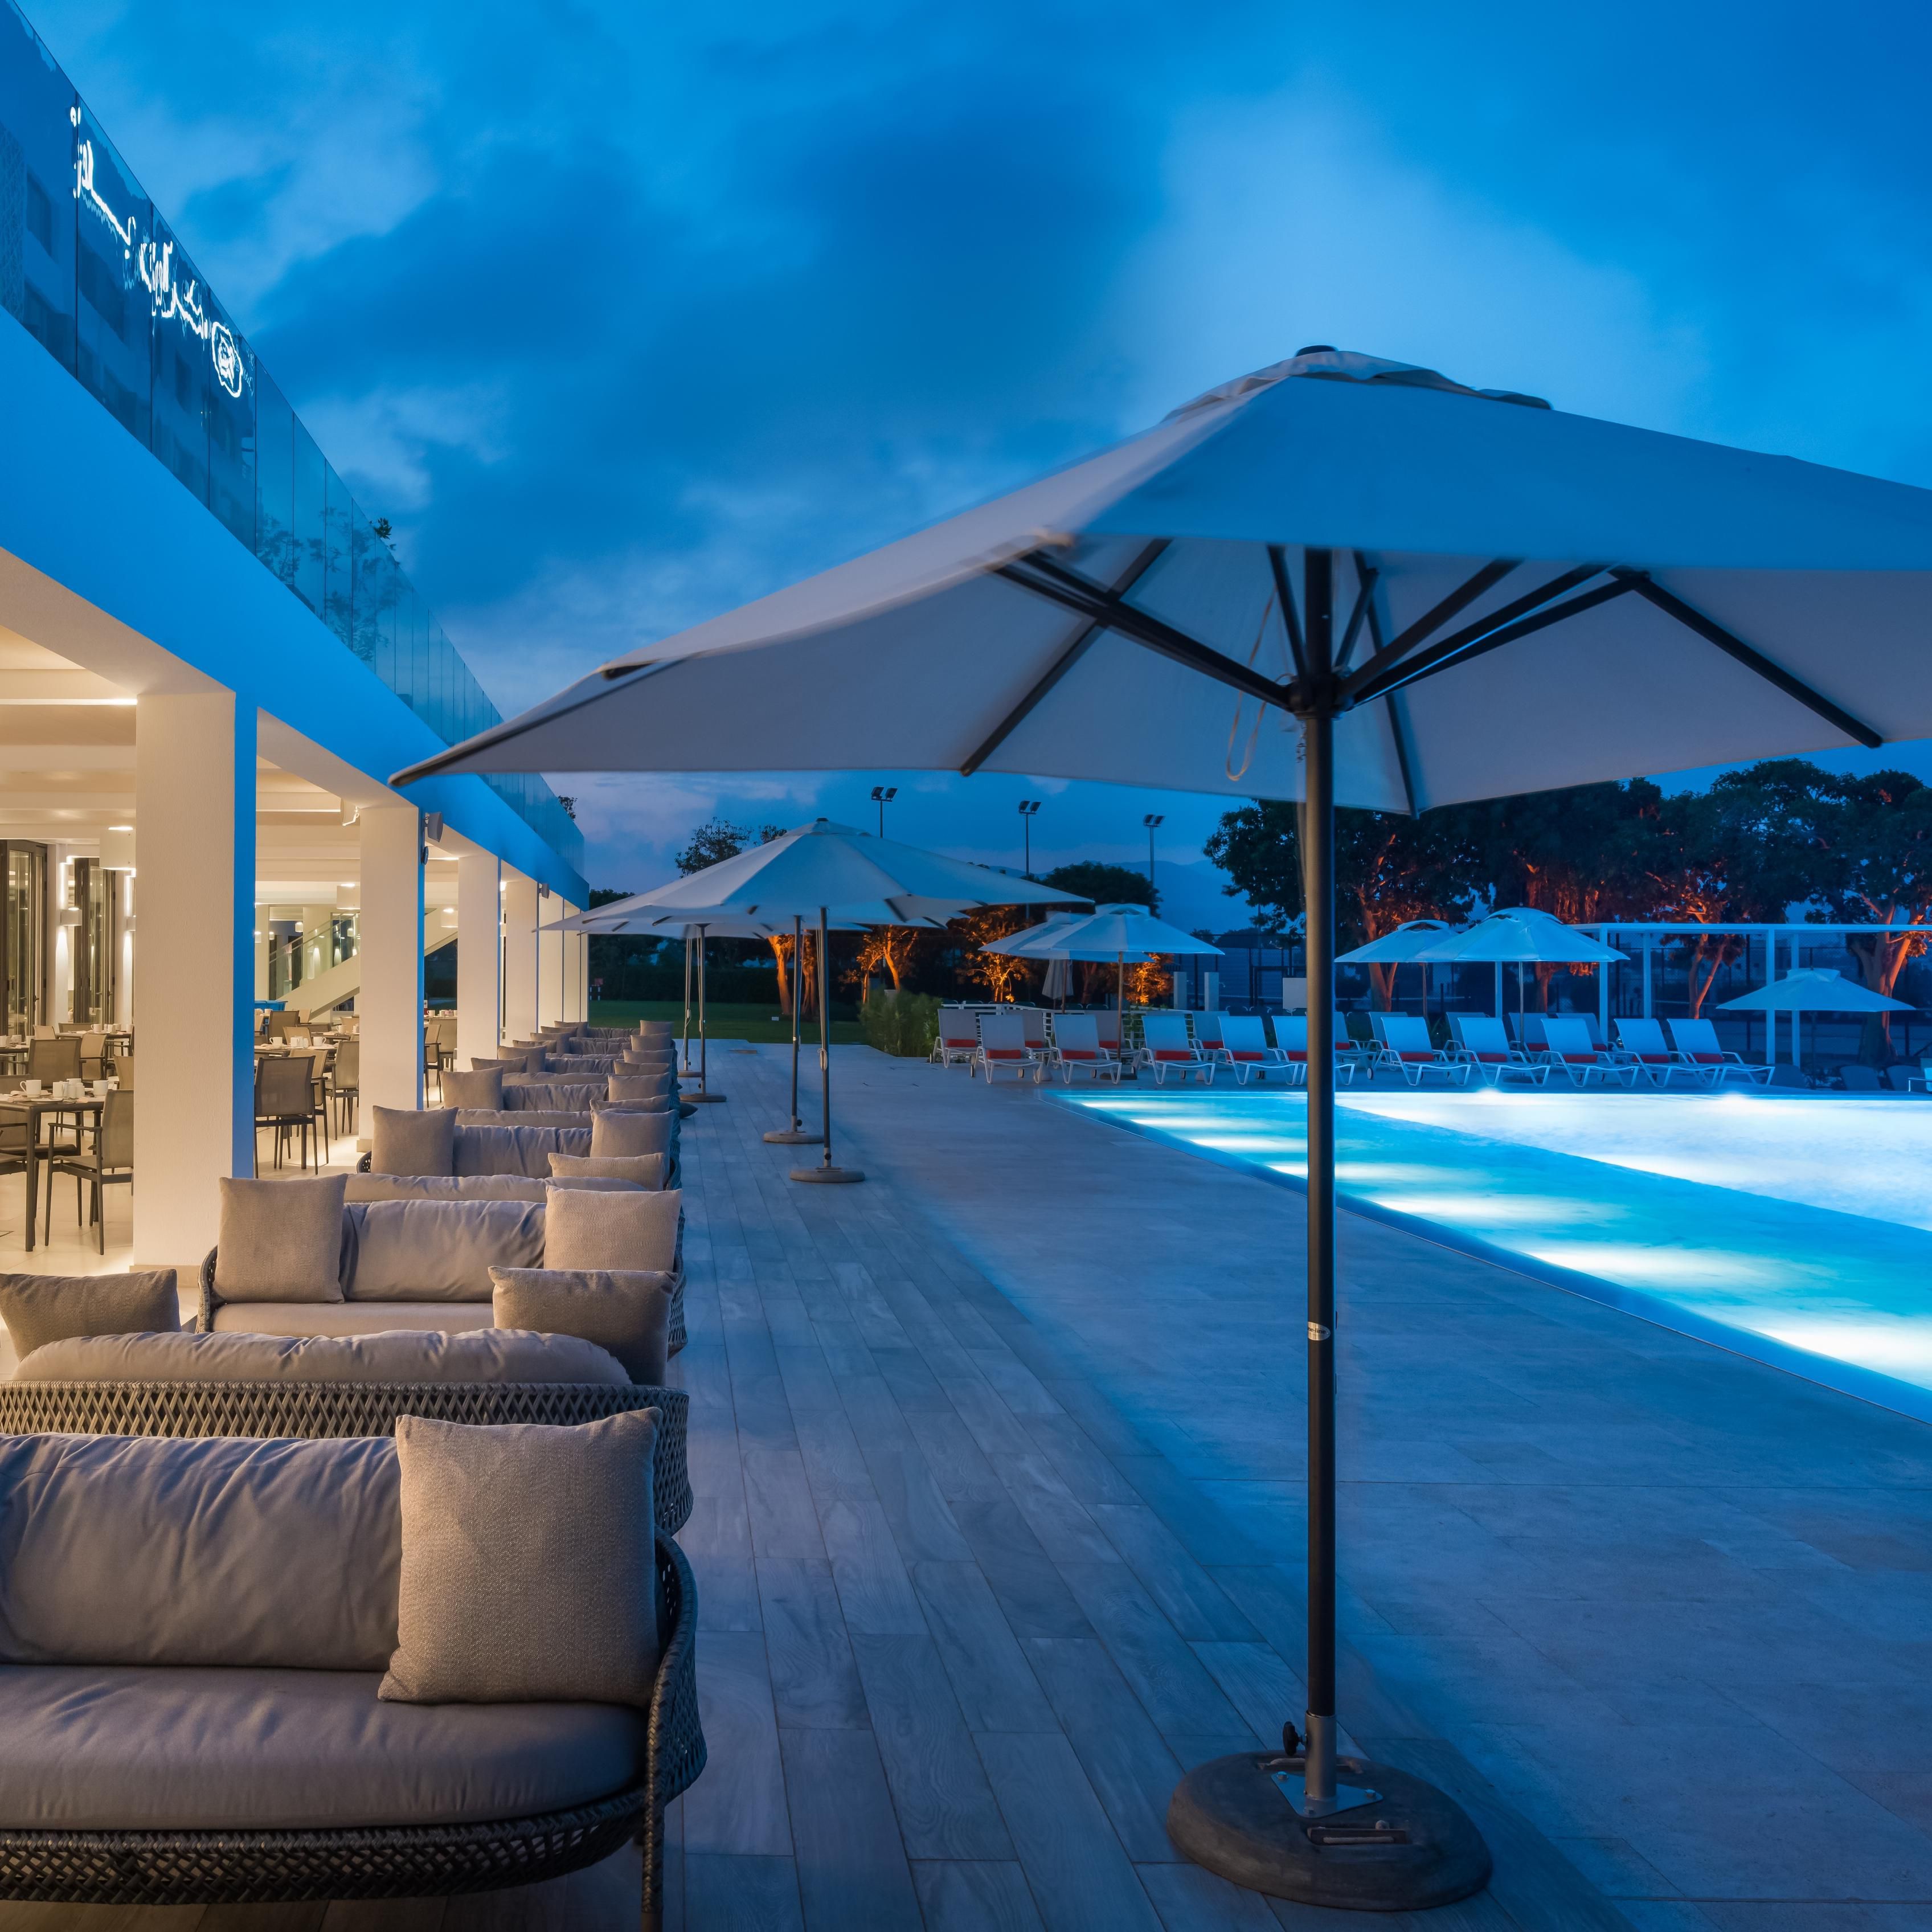 Stunning pool side terrace in the evening